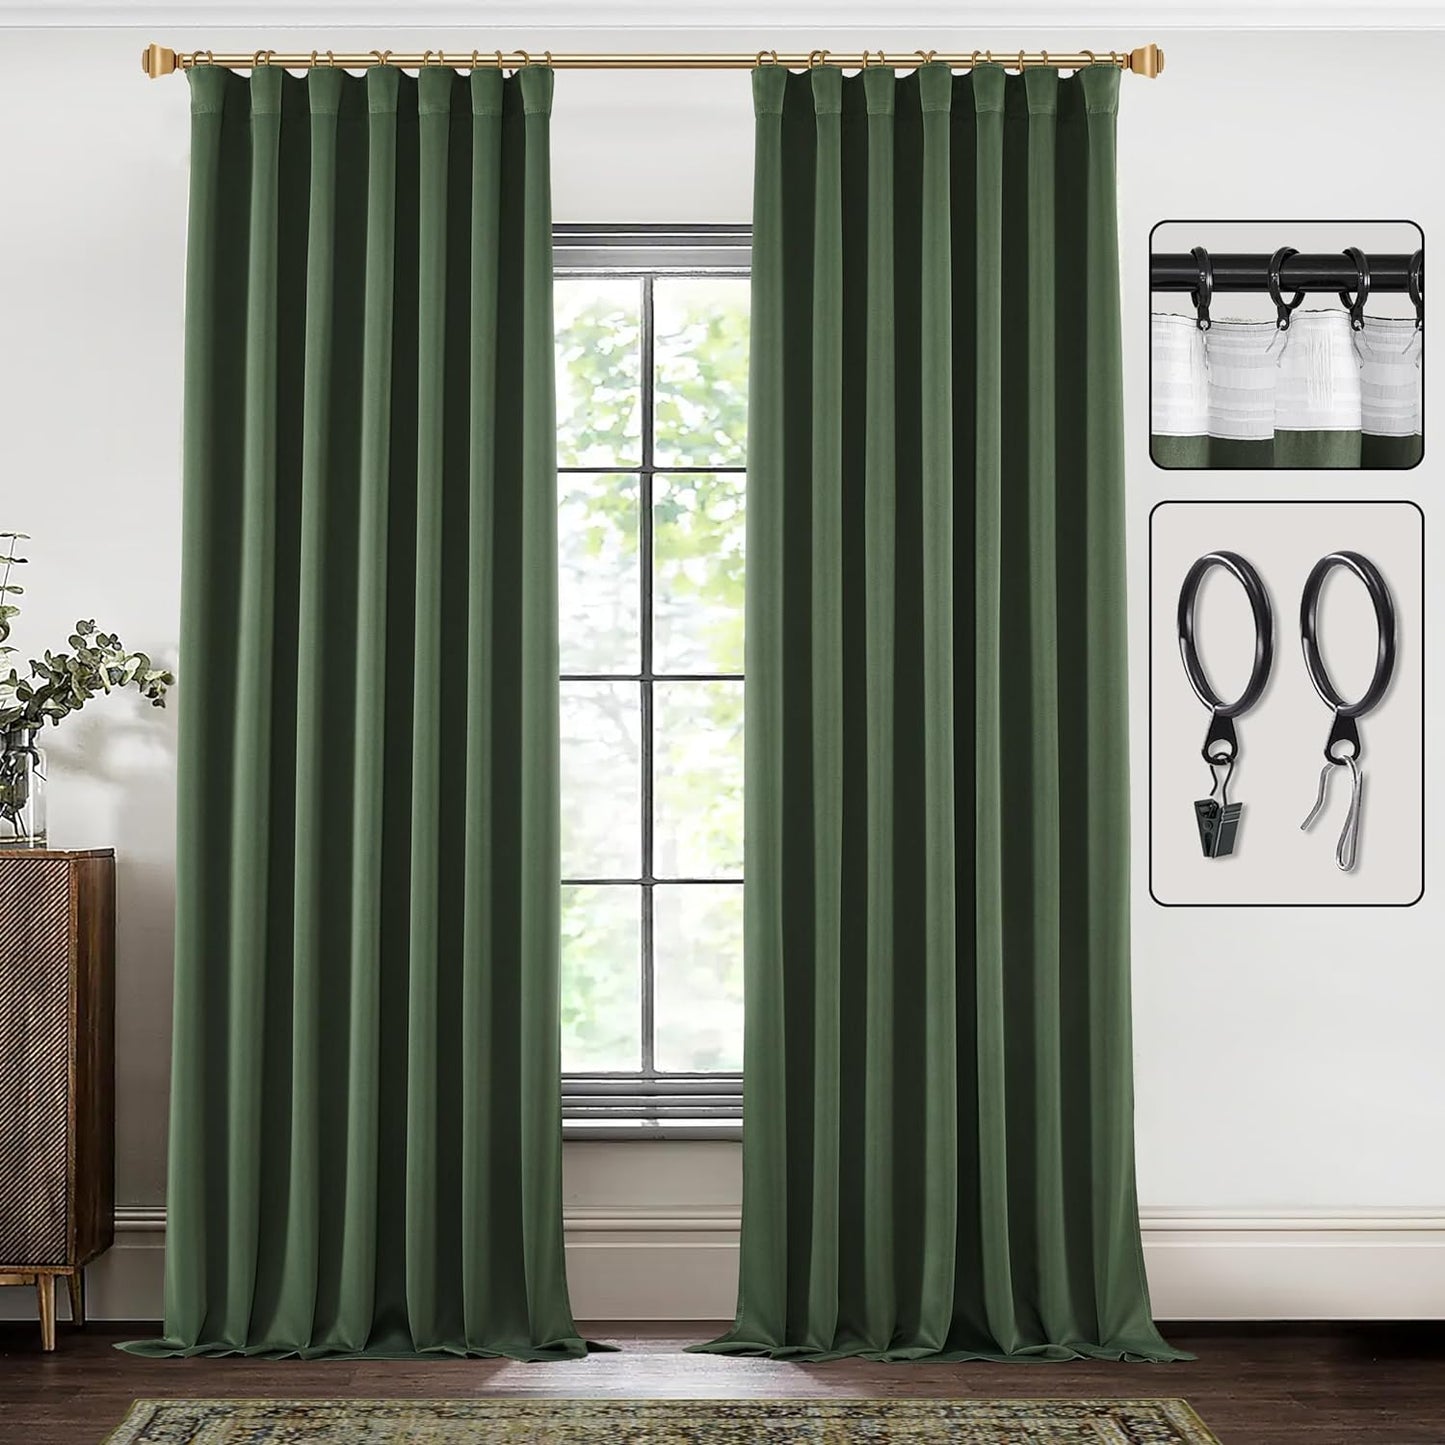 SHINELAND Beige Room Darkening Curtains 105 Inches Long for Living Room Bedroom,Cortinas Para Cuarto Bloqueador De Luz,Thermal Insulated Back Tab Pleat Blackout Curtains for Sunroom Patio Door Indoor  SHINELAND Olive Green 2X(52"Wx96"L) 